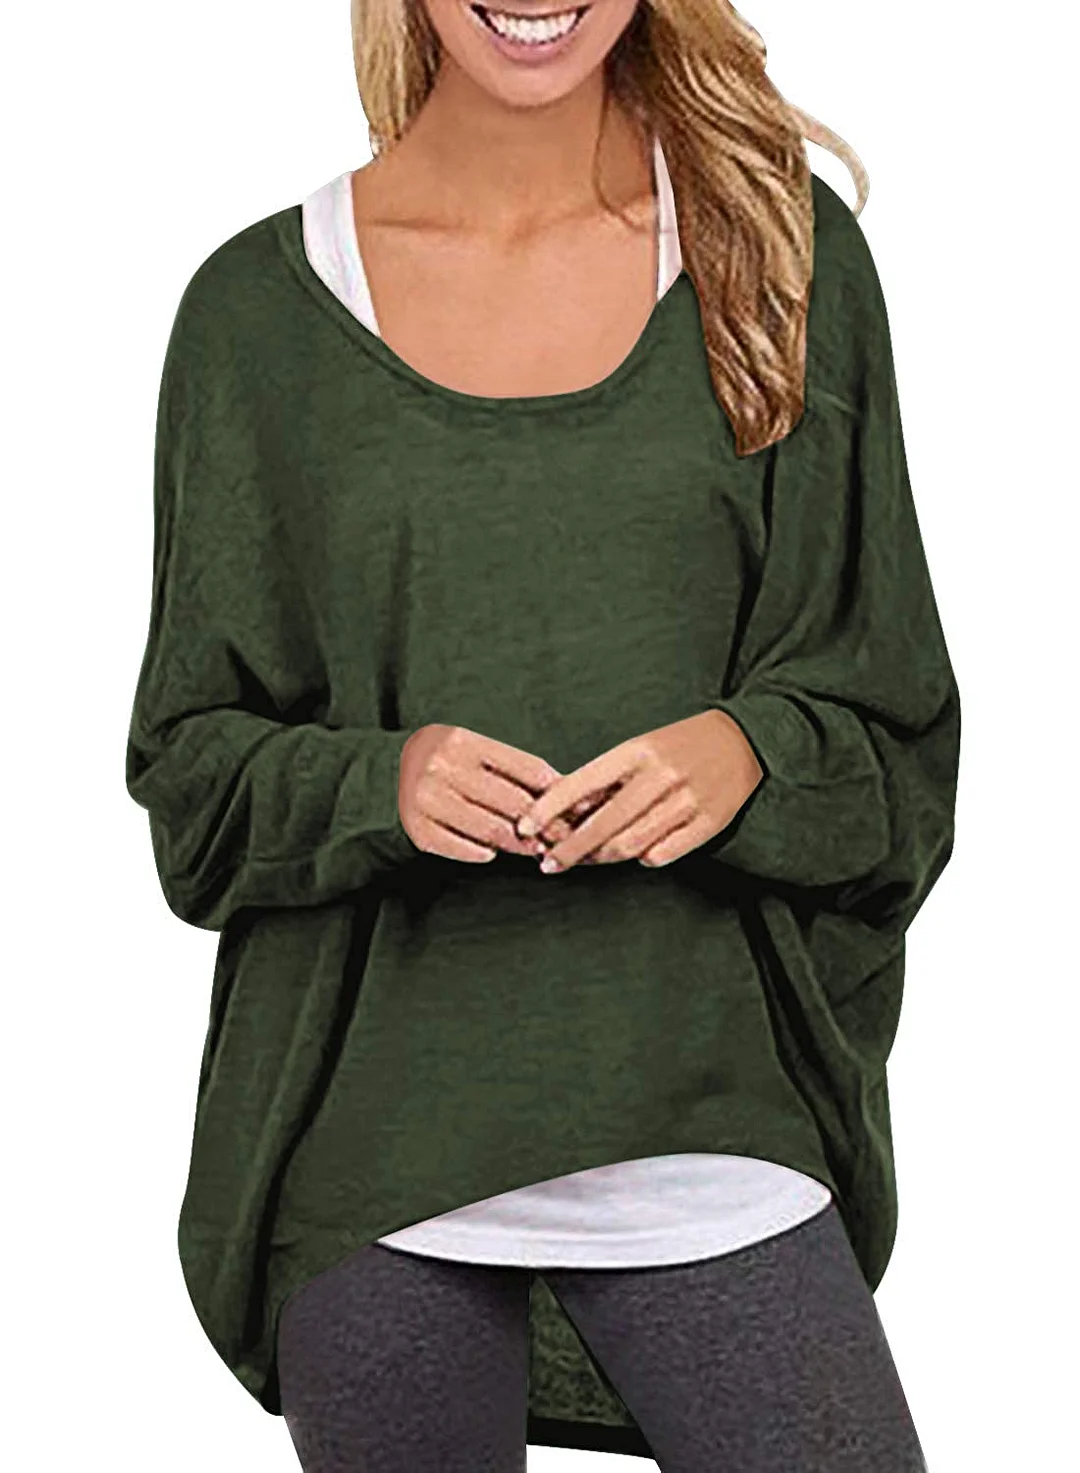 Womens Sweater Casual Oversized Baggy Off-Shoulder Long Sleeve Pullover Shirts Tops